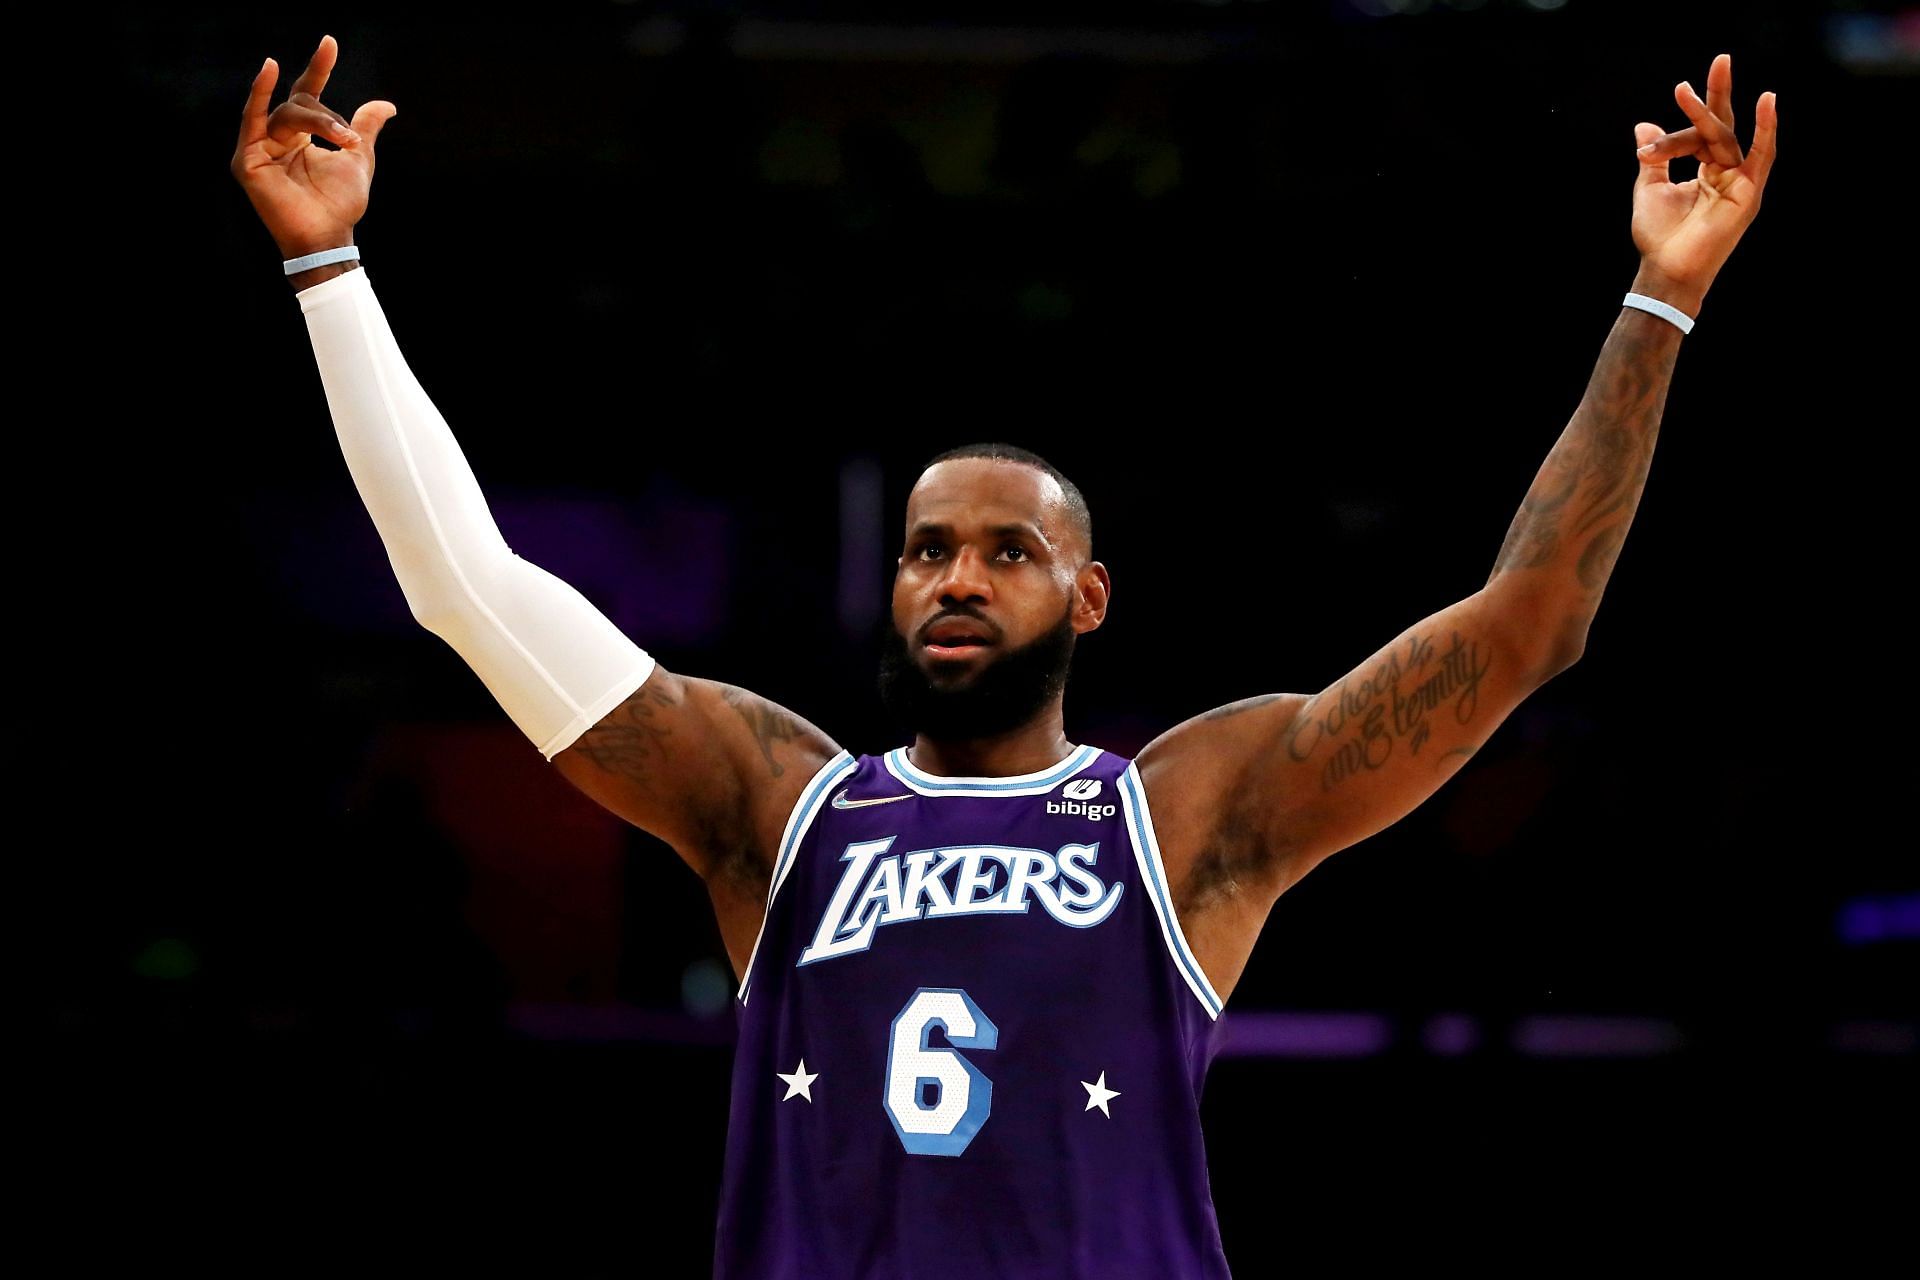 NBA superstar LeBron James of the Los Angeles Lakers.